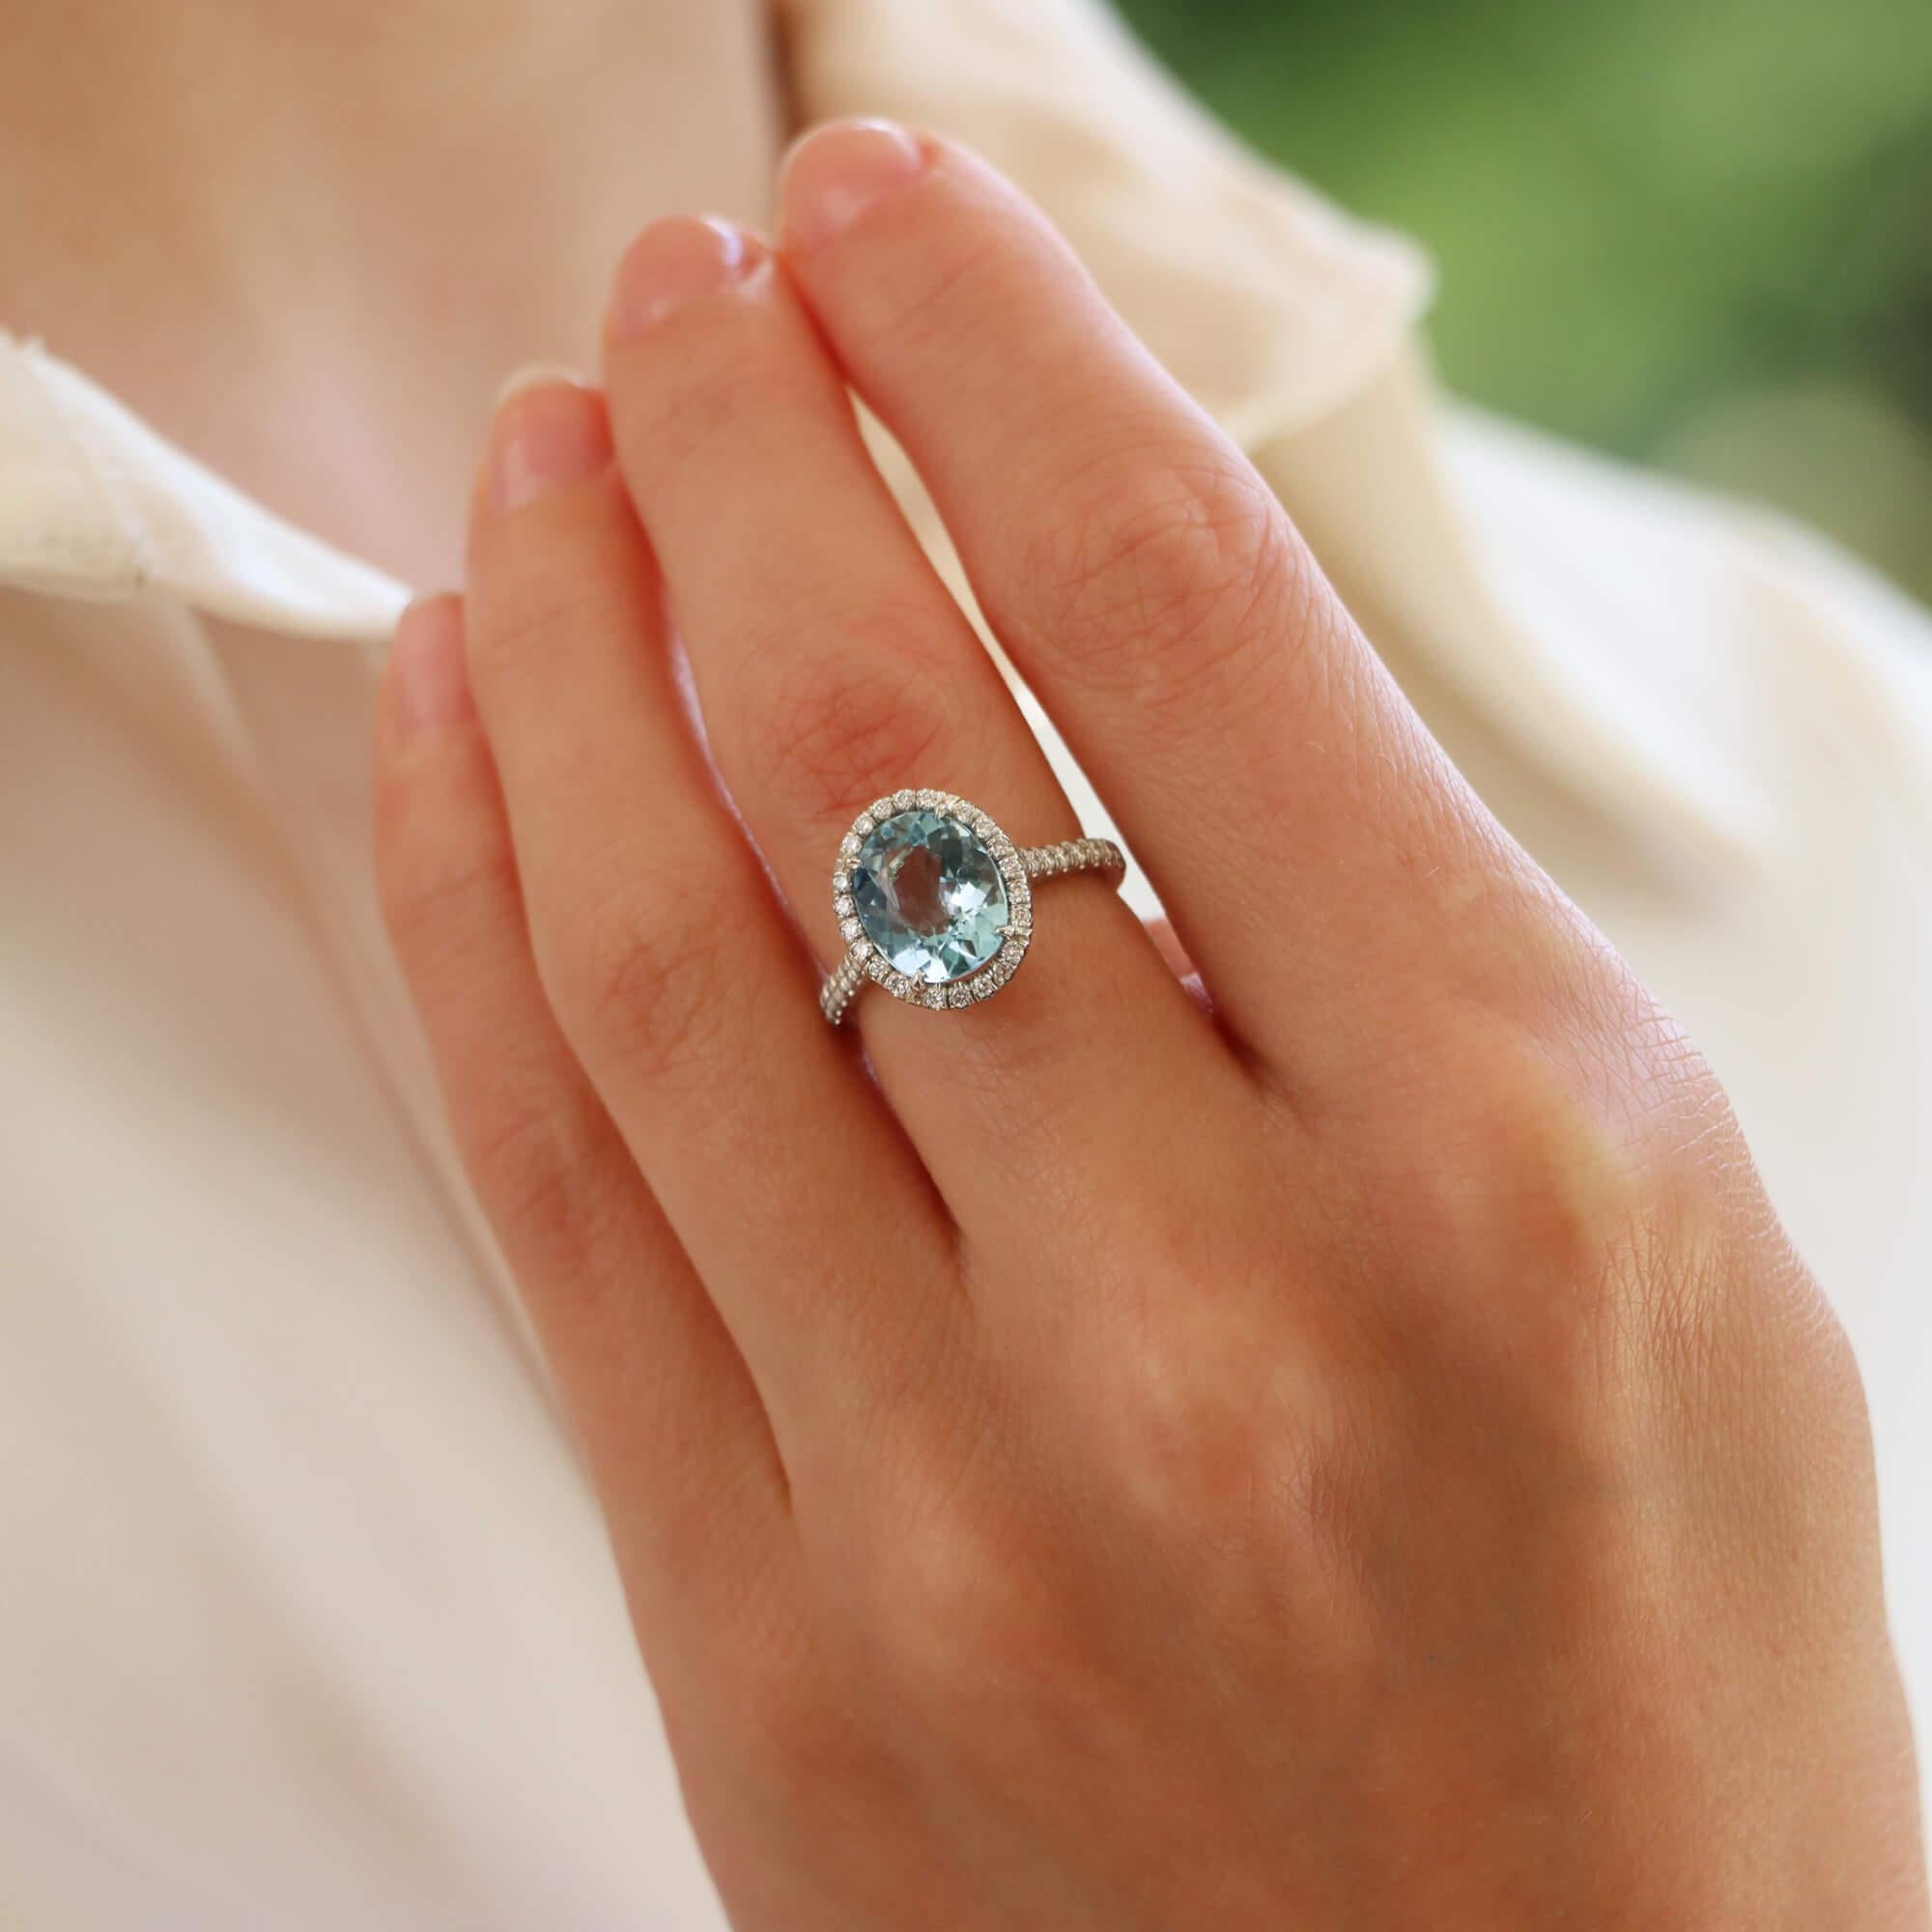  A beautiful aquamarine and diamond halo ring set in platinum.

The ring centrally features a beautiful vibrant blue oval cut aquamarine surrounded by a halo of 22 round brilliant-cut diamonds. Each shoulder is further accented with 10 round